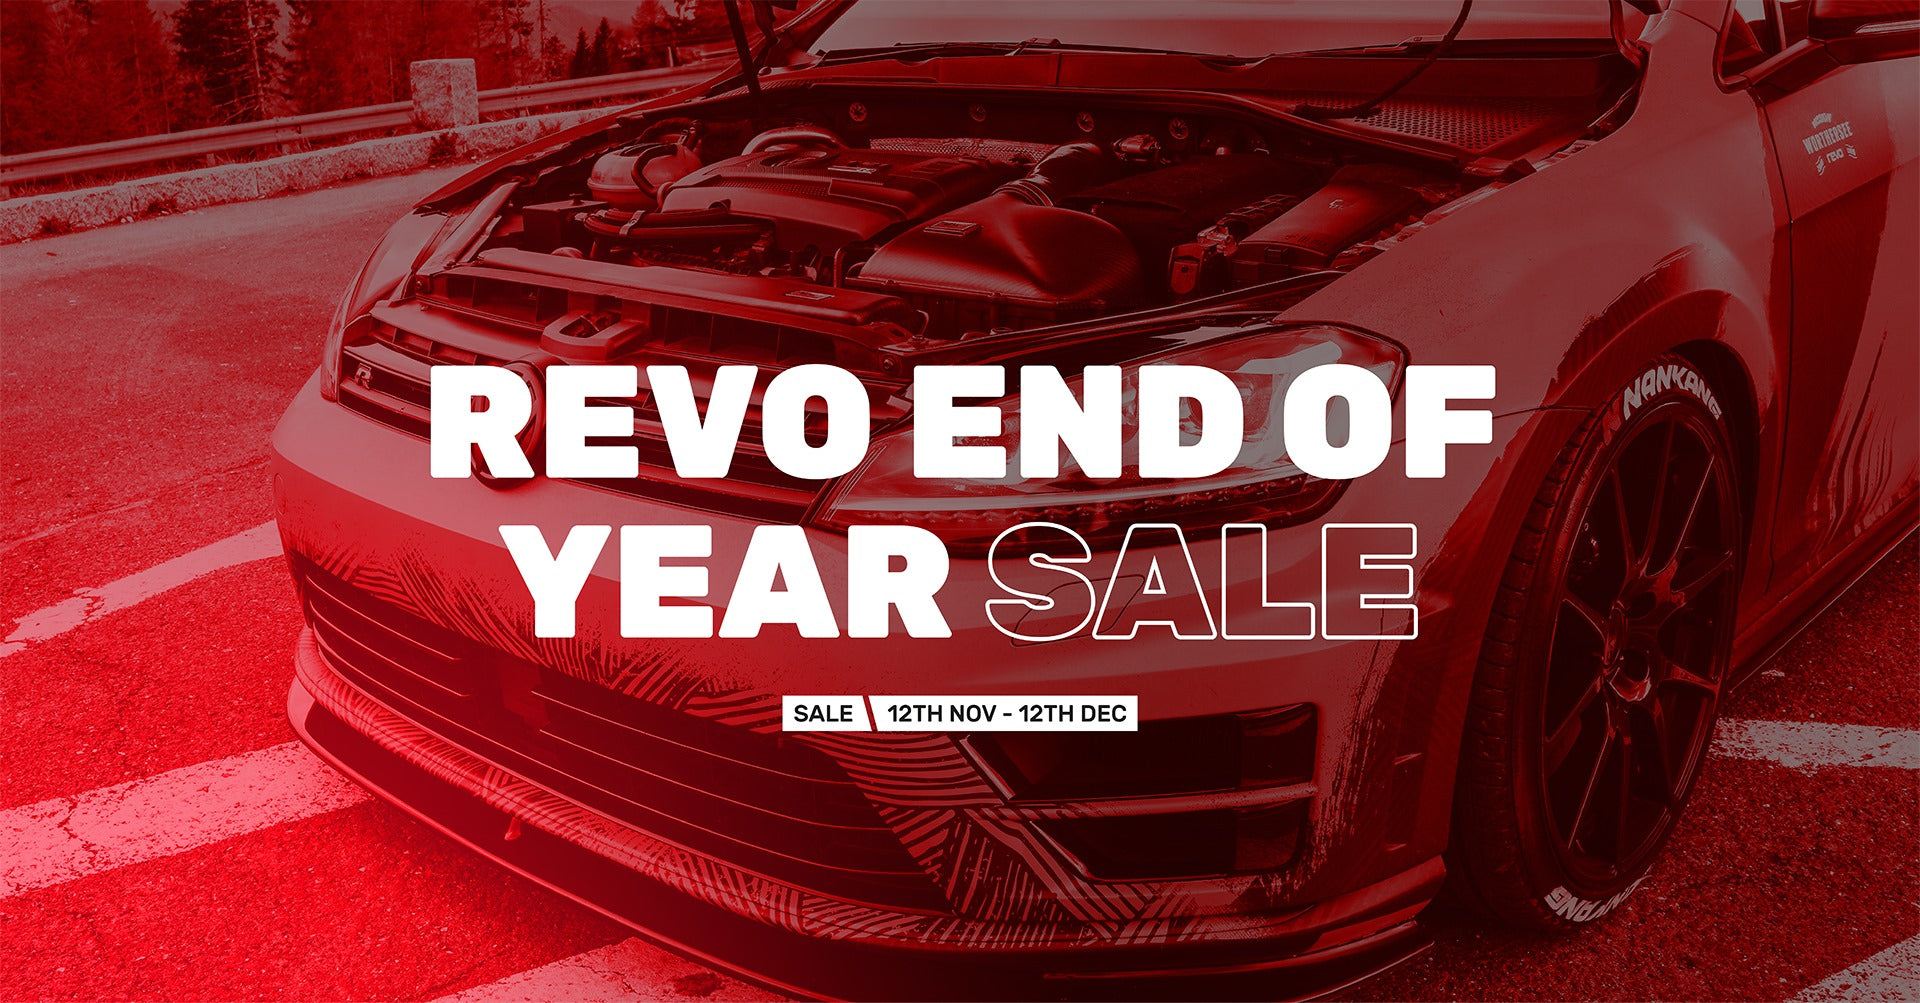 Revo End of Year Sale 2020